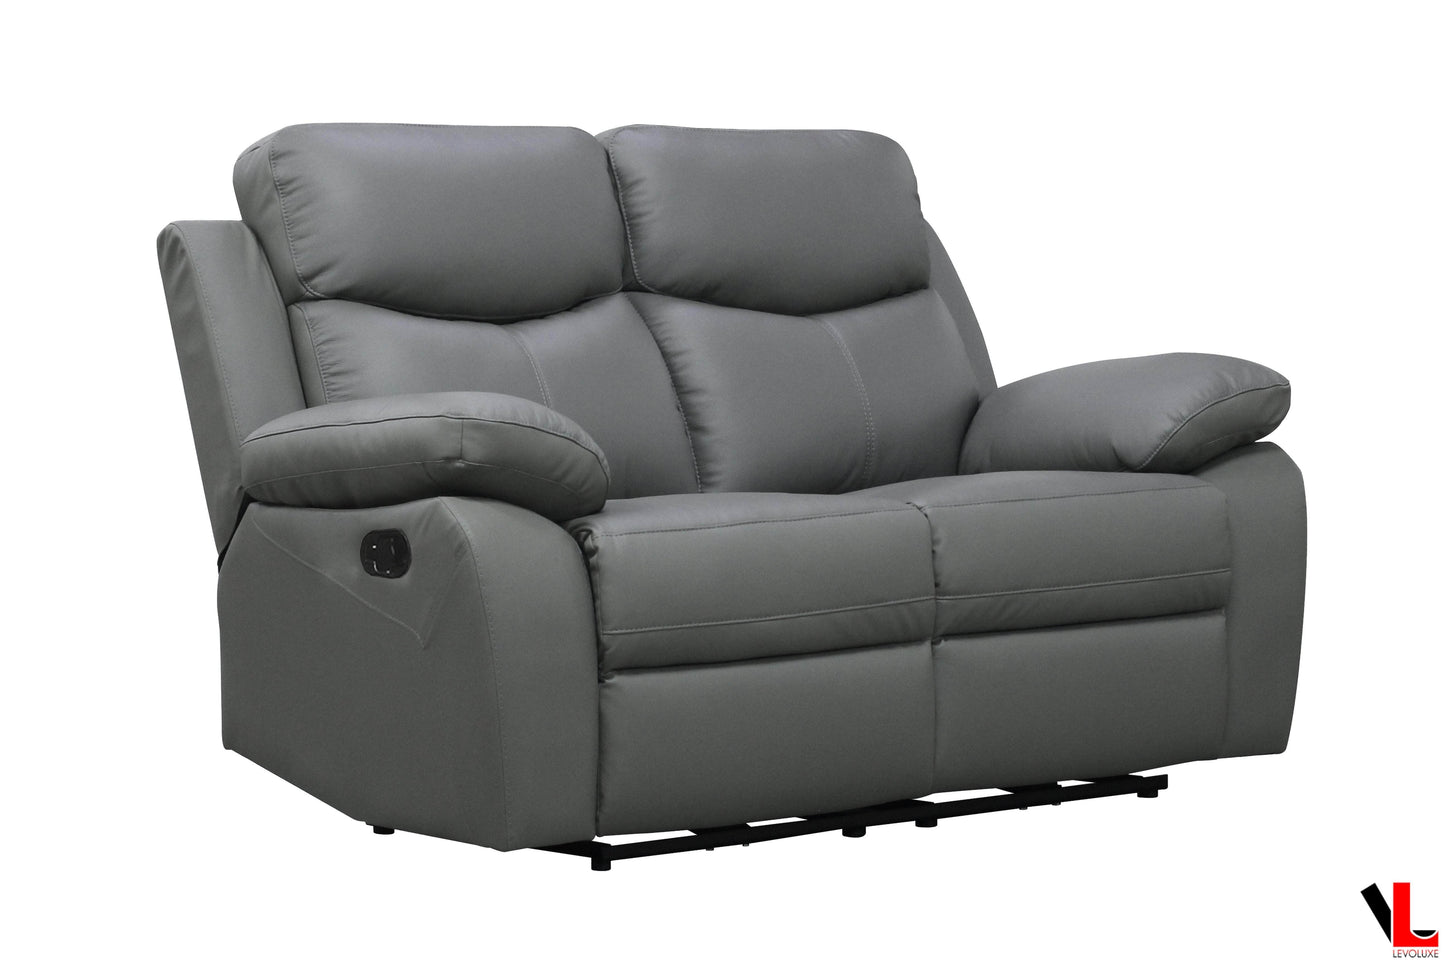 Levoluxe Sofa Set Aveon 2 Piece Pillow Top Arm Reclining Sofa and Loveseat Set in Leather Match - Available in 2 Colours